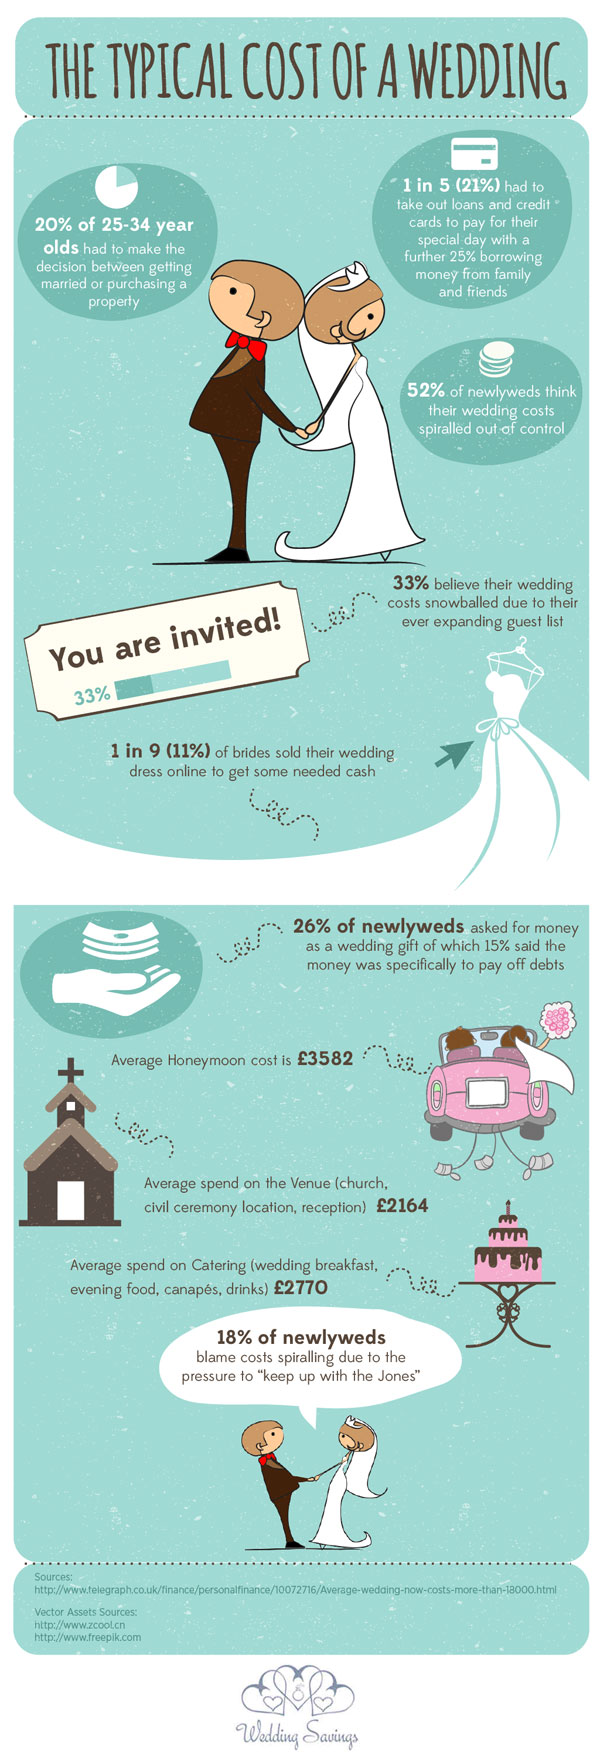 The Typical Cost of a Wedding